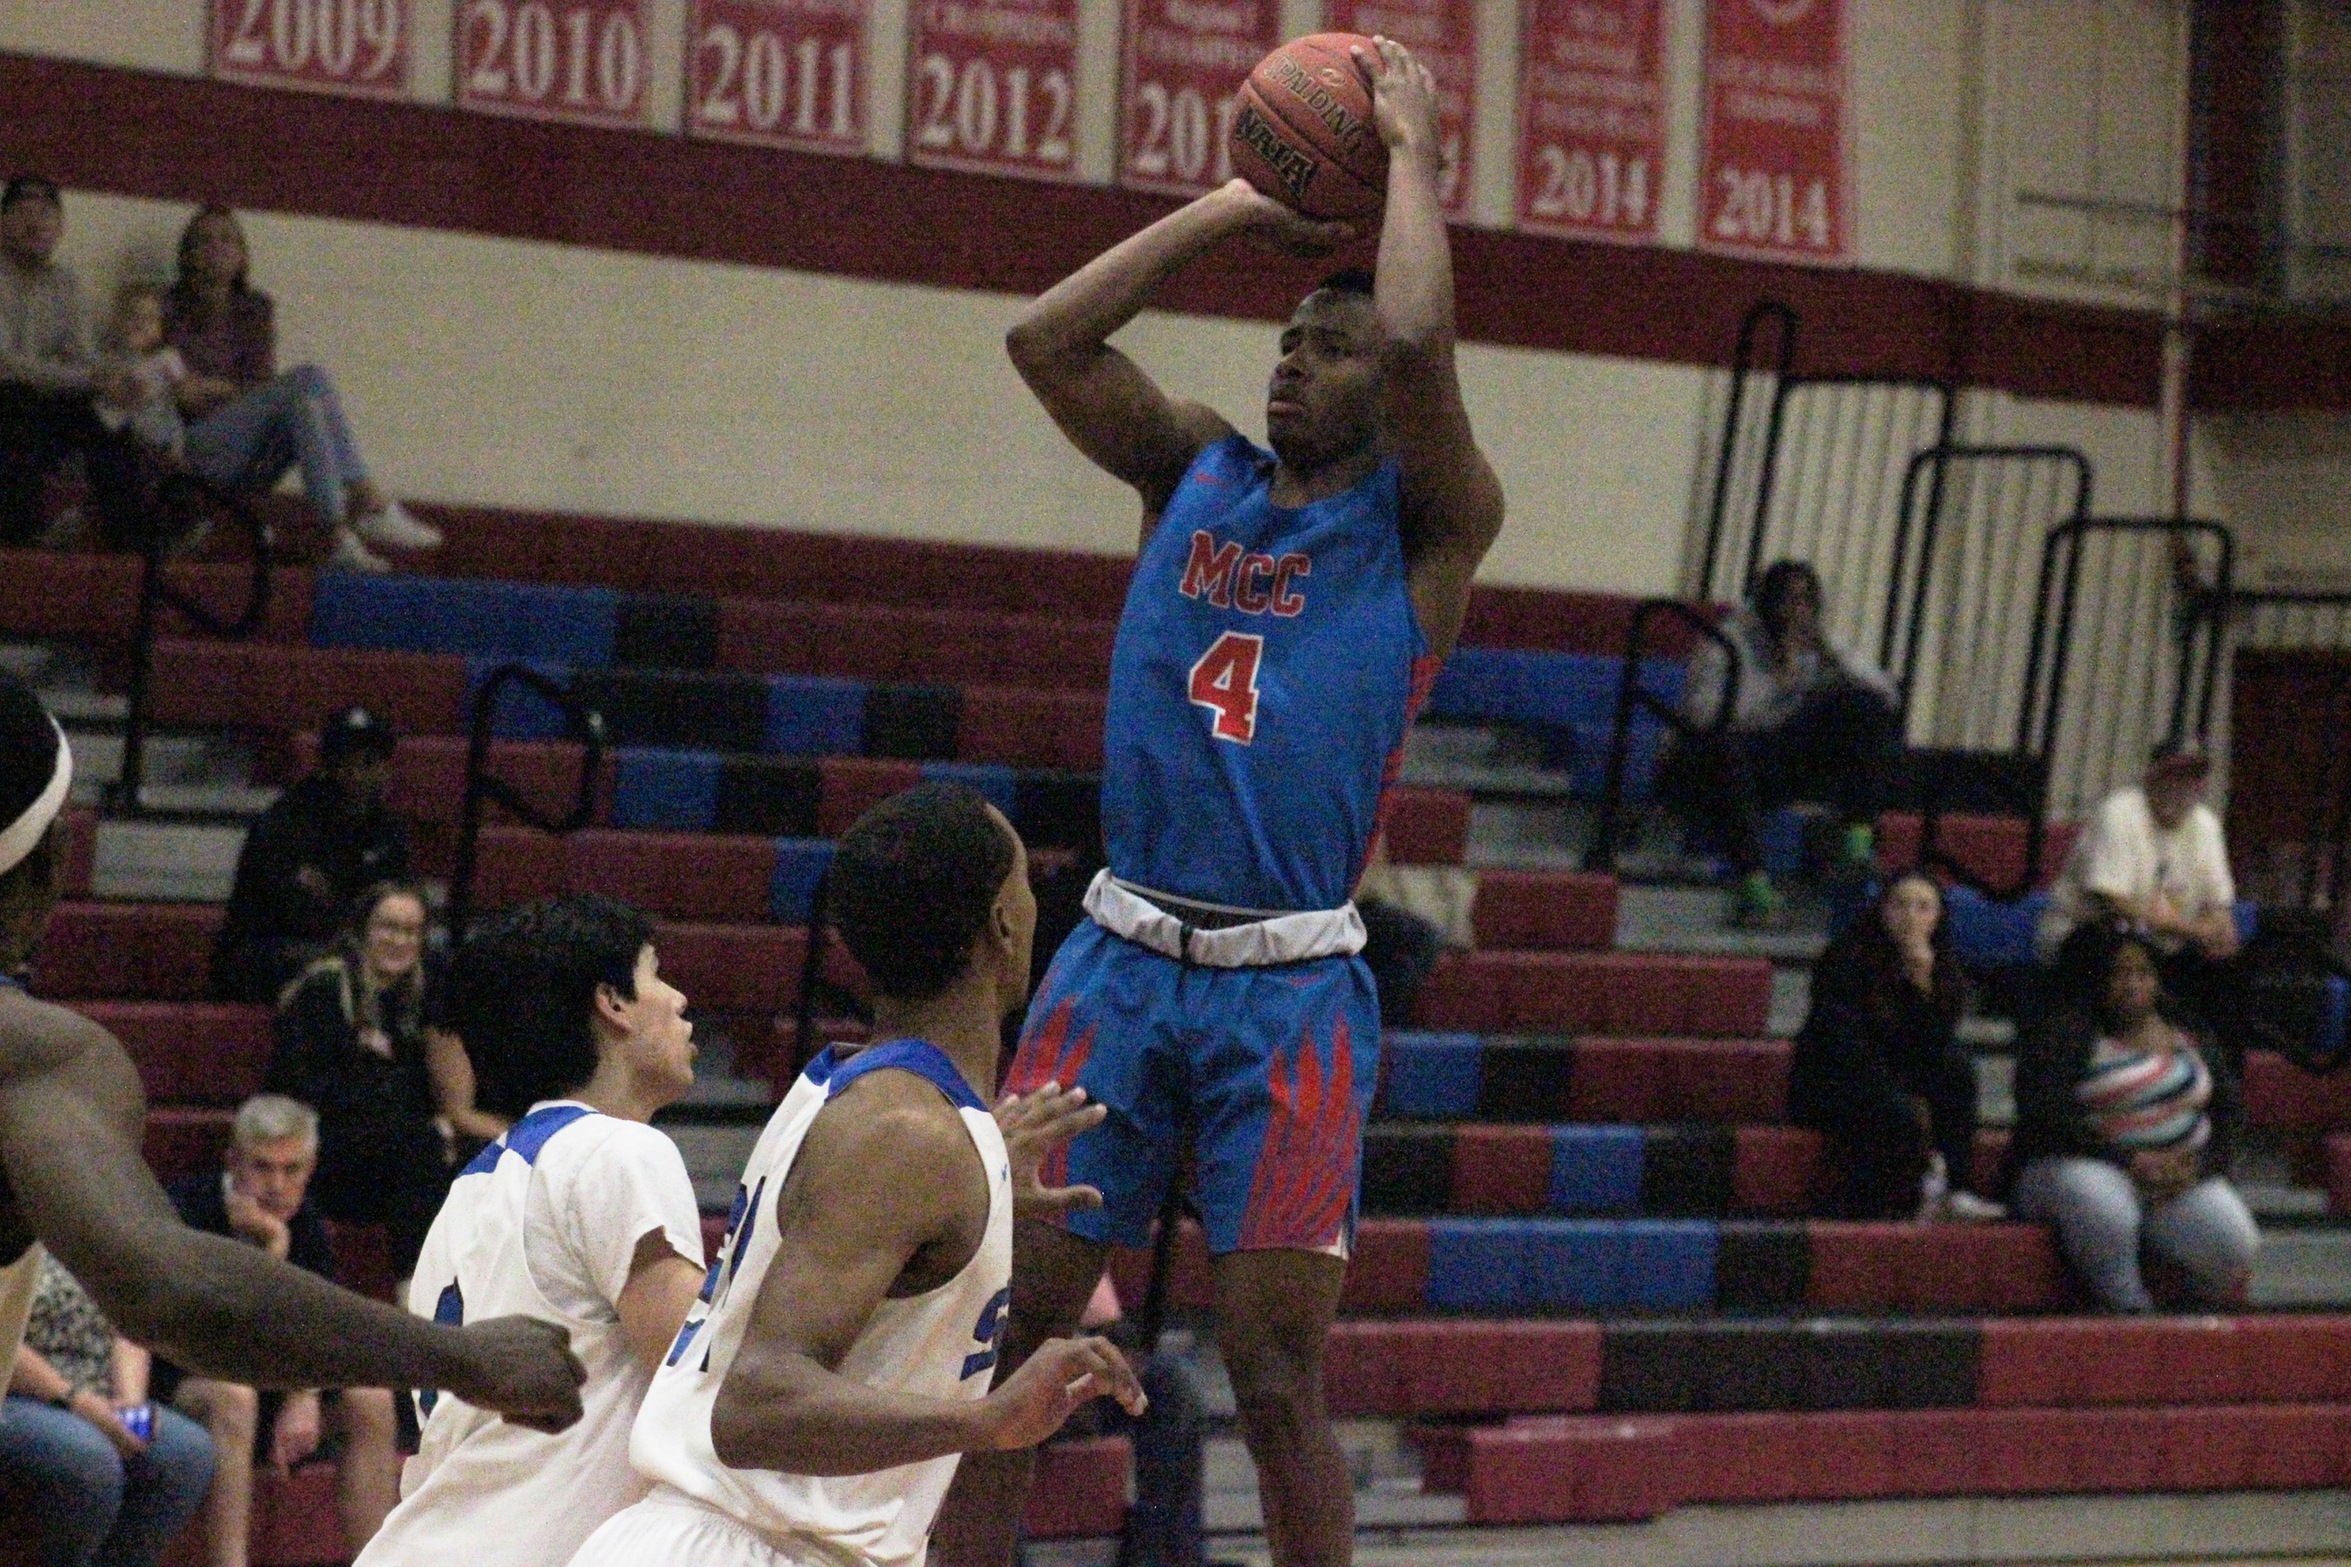 Men's basketball suffers their first loss of the season as they fall to South Mountain.